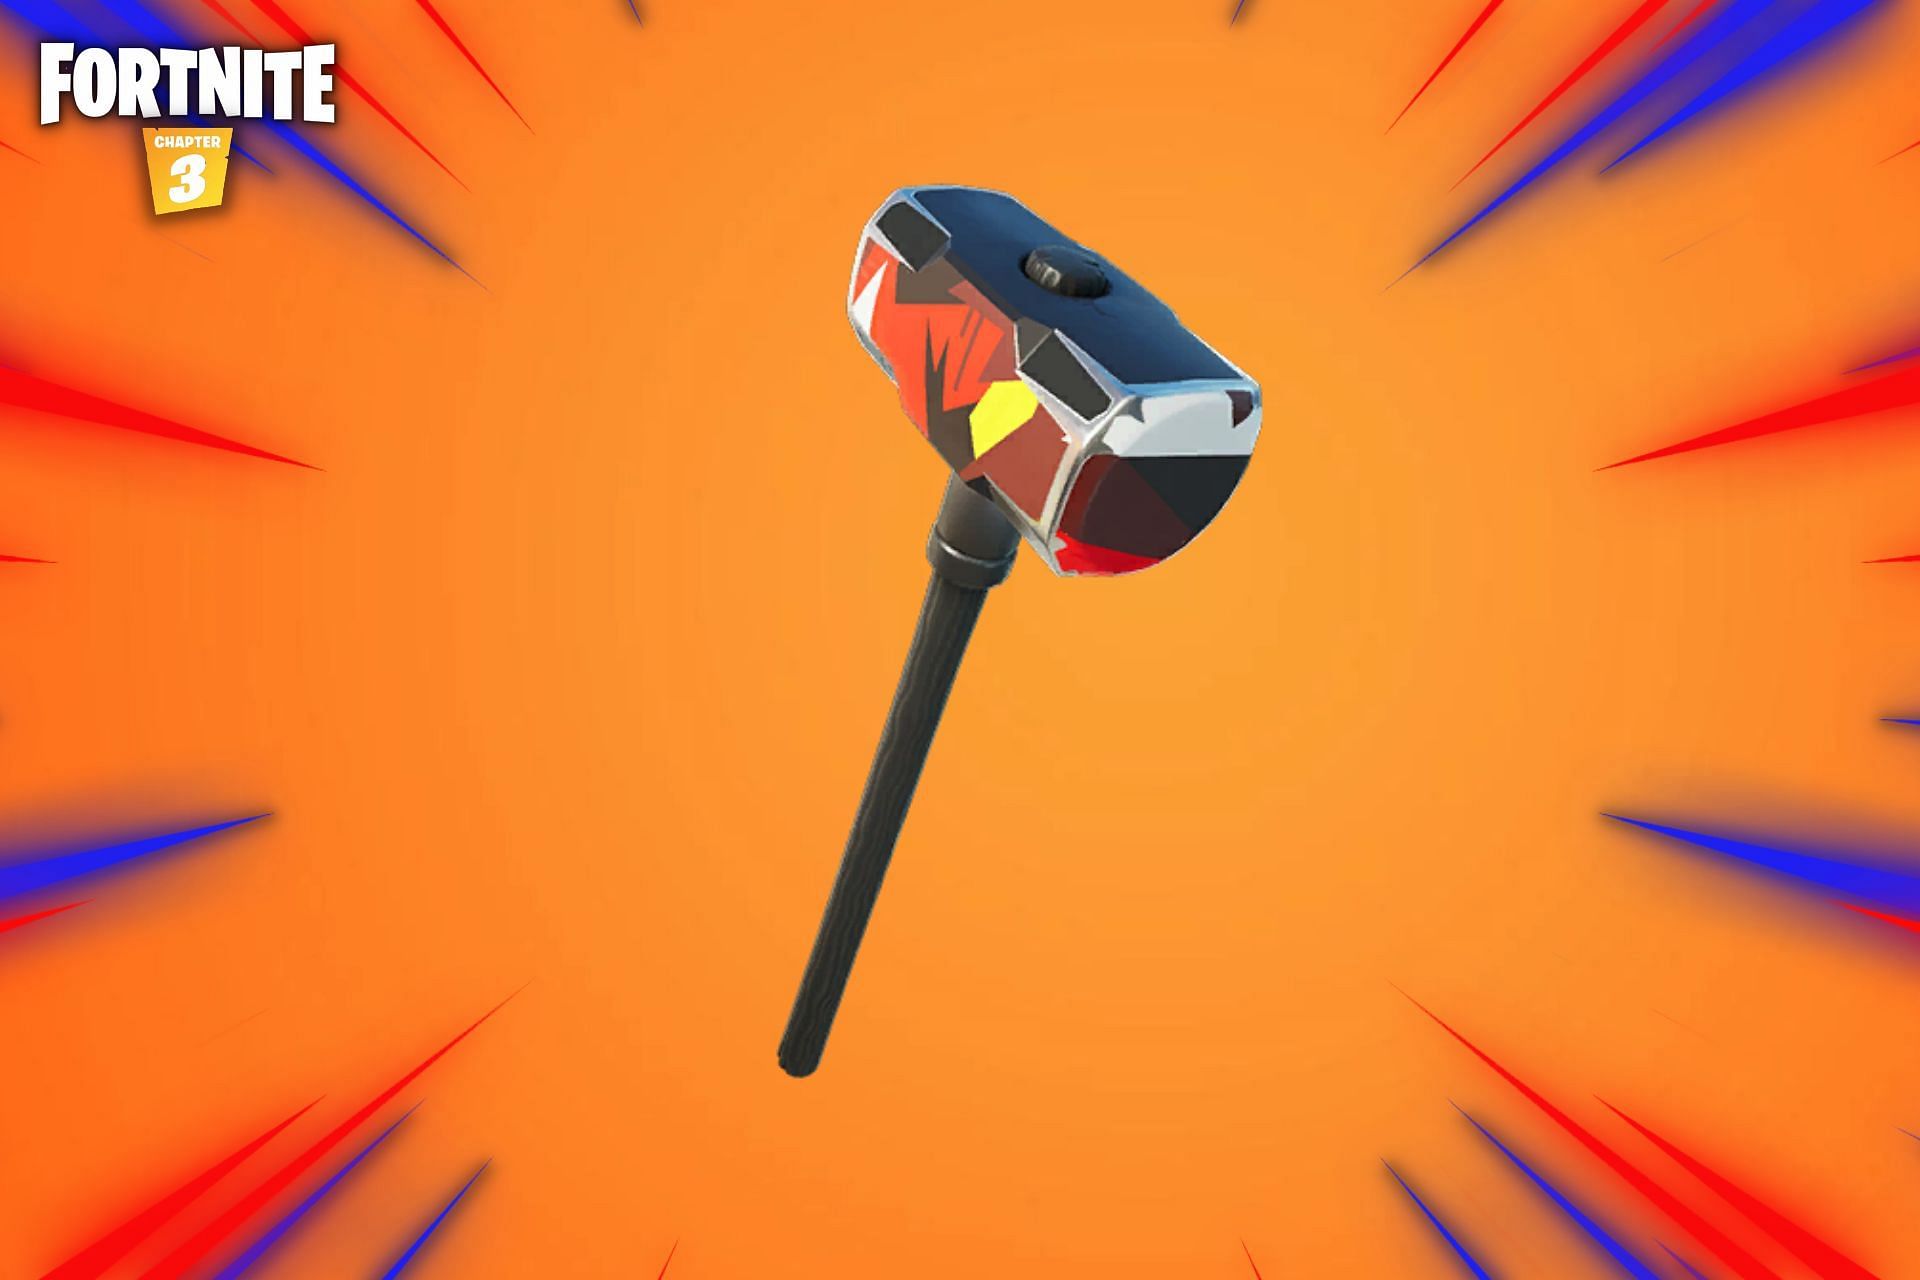 Obtain the Secret Sledge pickaxe for free in Fortnite by completing a few Covert Ops challenges (Image via Sportskeeda)